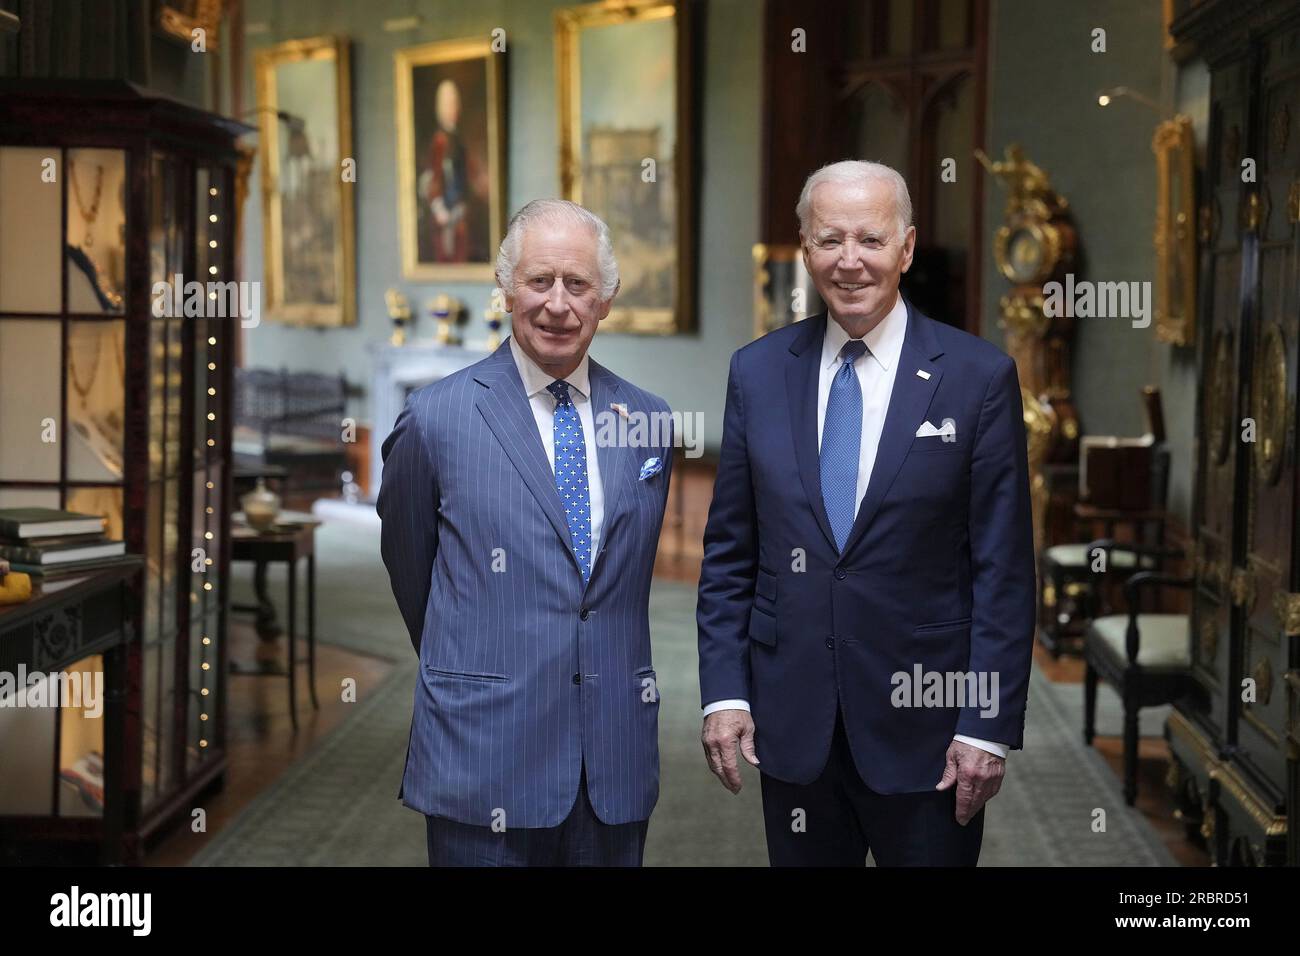 Windsor, United Kingdom. 10th July, 2023. U.S President Joe Biden, right, poses with Britain's King Charles III at Windsor Castle, July 10, 2023 in Windsor, England. Biden participated in the Climate Finance Mobilization Forum sponsored by the King. Credit: Adam Schultz/White House Photo/Alamy Live News Stock Photo